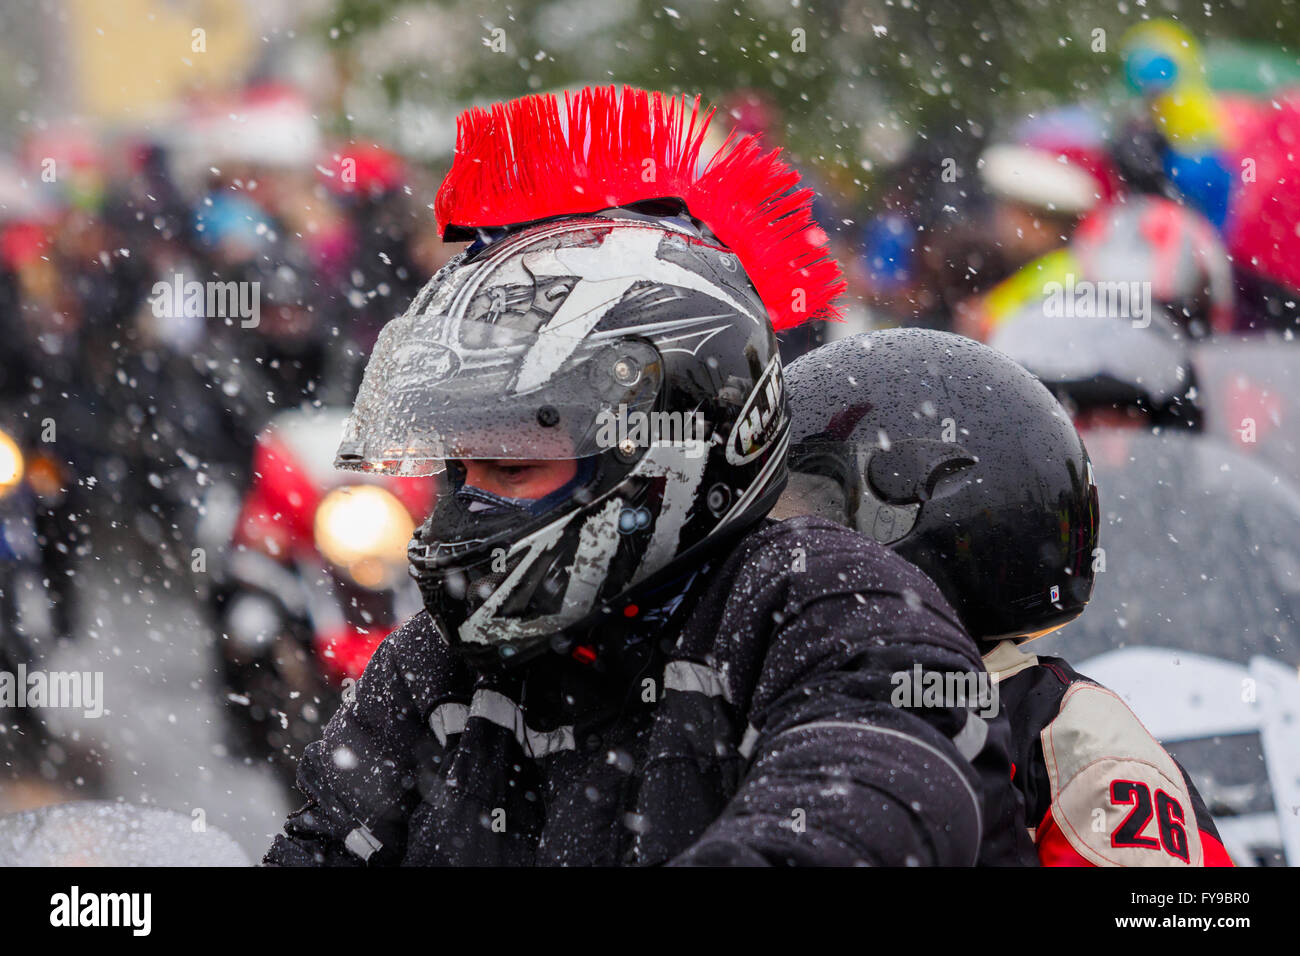 Motorcyclist drive in a procession through the town of Kulmbach, Germany, 24 April 2016. More than 1,000 motorcycle enthusiasts have come toegther for the traditional 16th 'Motorrad-Sternfahrt' (Motorcycle procession). Photo: Nicolas Armer/dpa (EDITORIAL NOTE: picture taken with long time exposure) Stock Photo